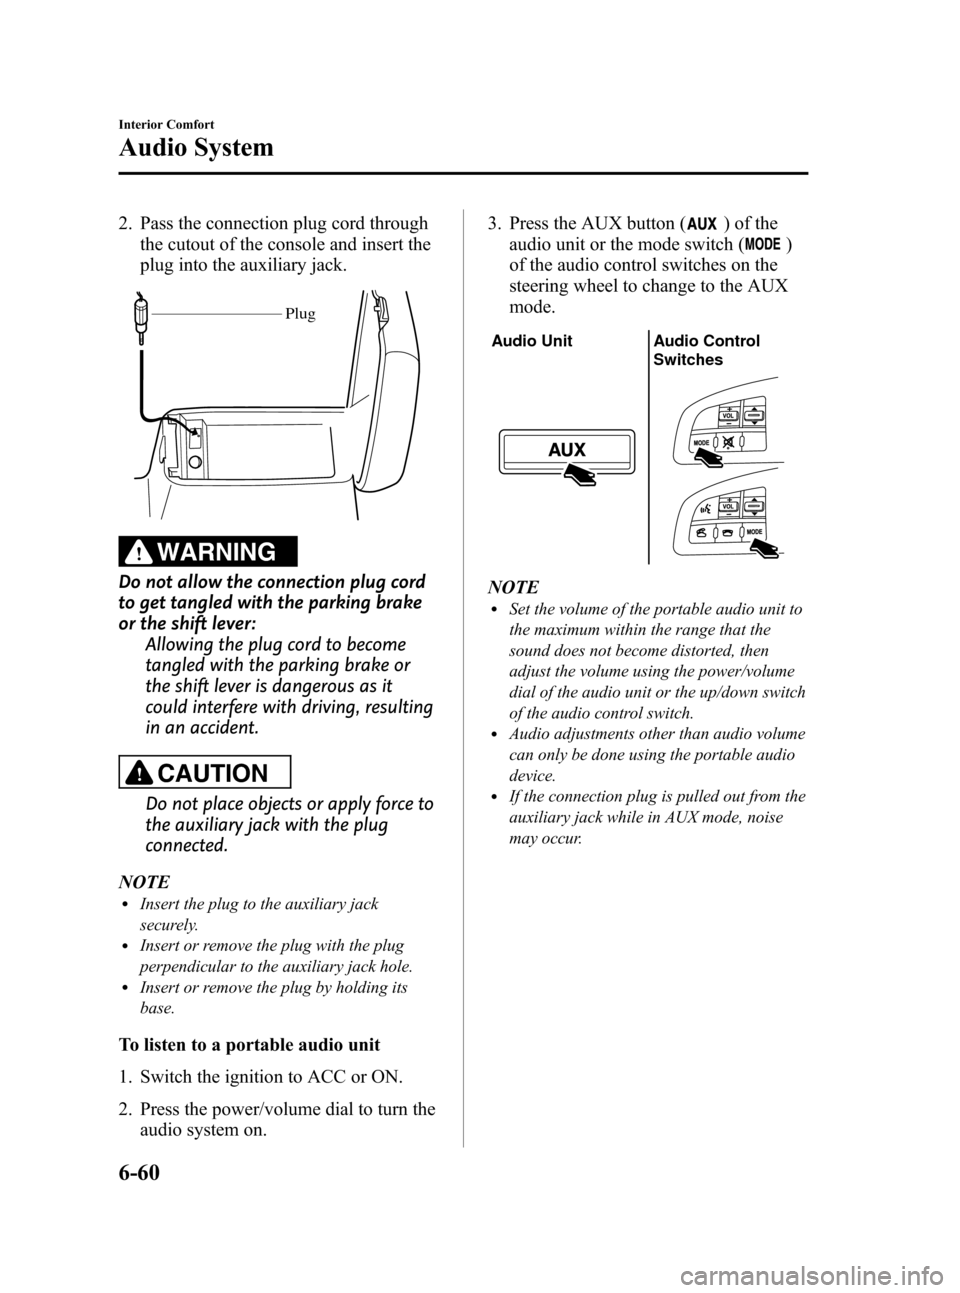 MAZDA MODEL 3 HATCHBACK 2011  Owners Manual (in English) Black plate (292,1)
2. Pass the connection plug cord throughthe cutout of the console and insert the
plug into the auxiliary jack.
Plug
WARNING
Do not allow the connection plug cord
to get tangled wit